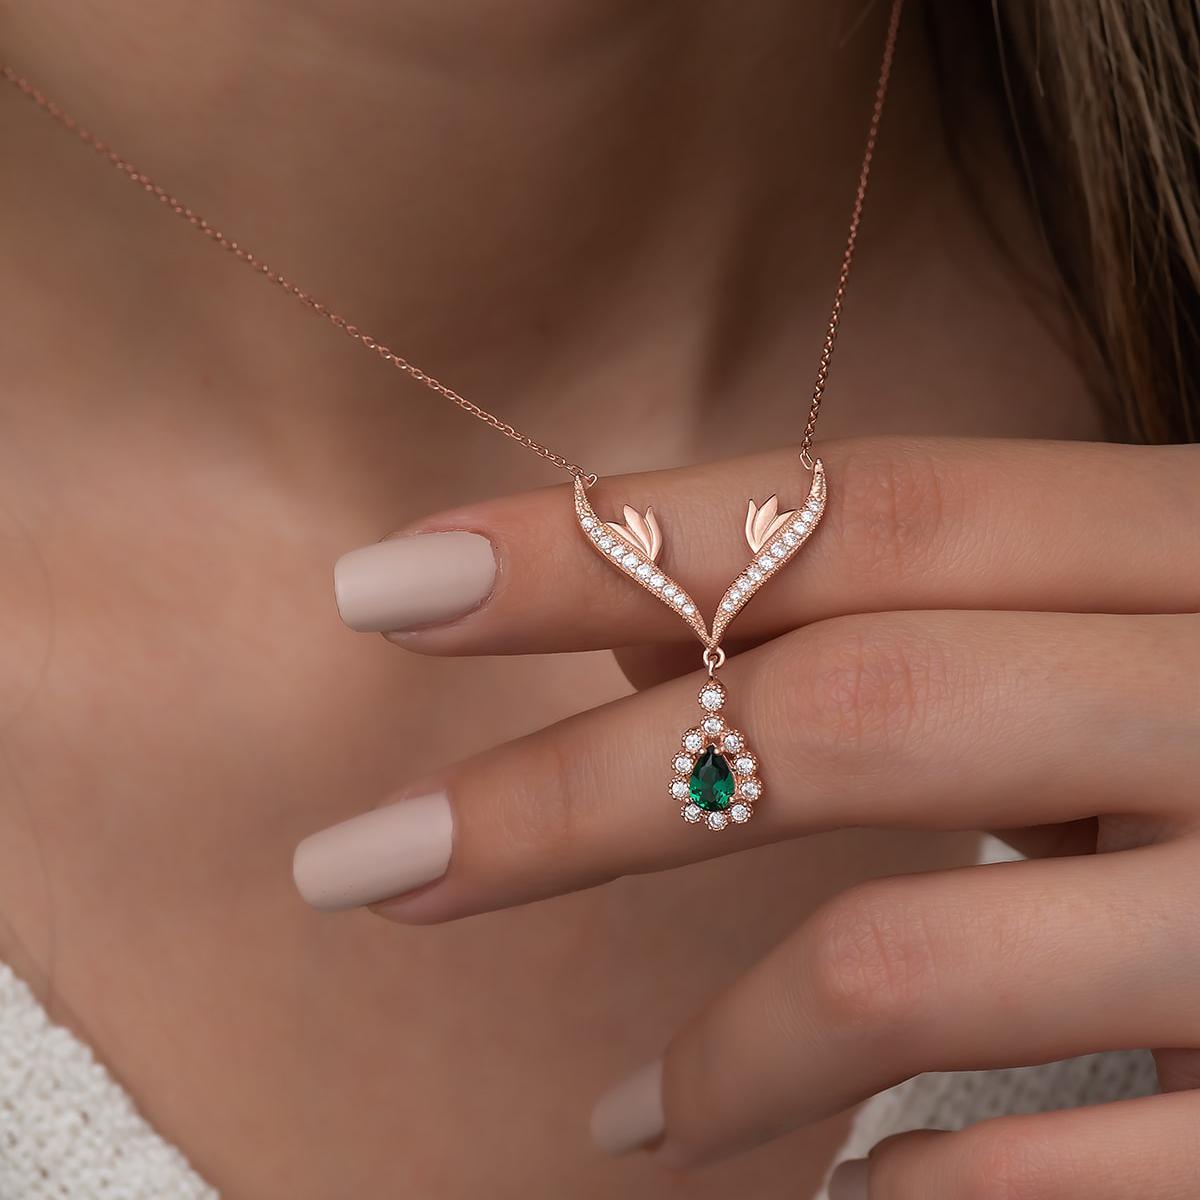 Teardrop Emerald Necklace • Emerald Pendant Necklace • Gift For Mom - Trending Silver Gifts